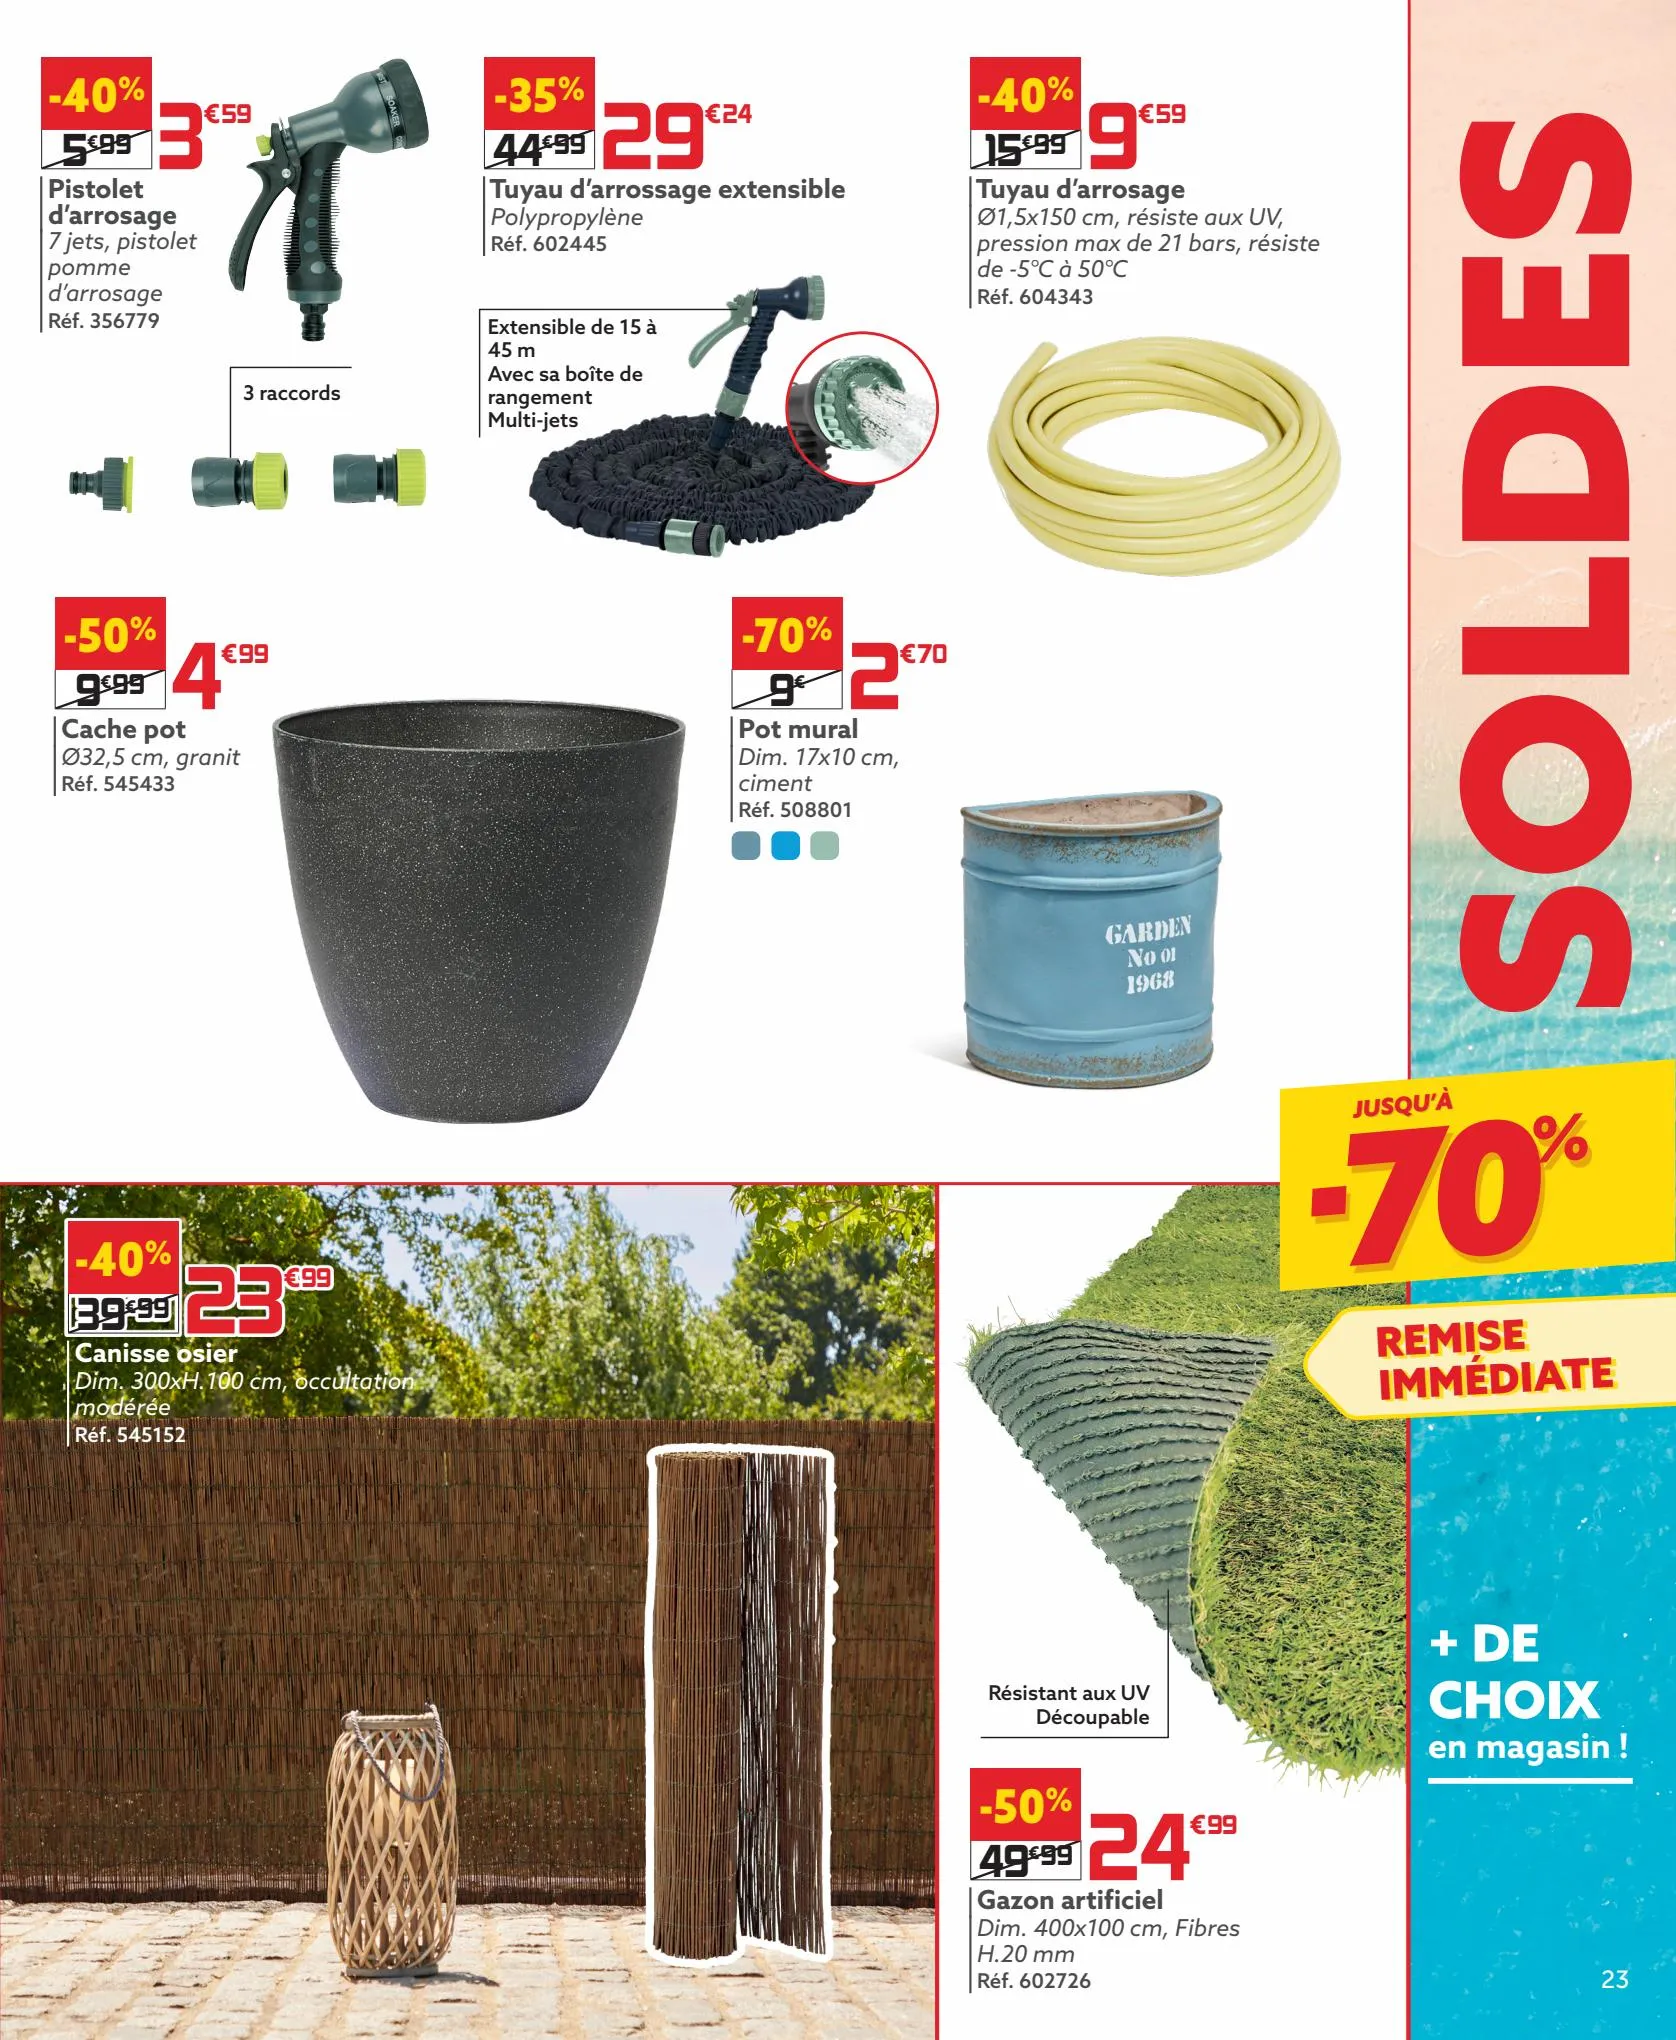 Catalogue Soldes, page 00023